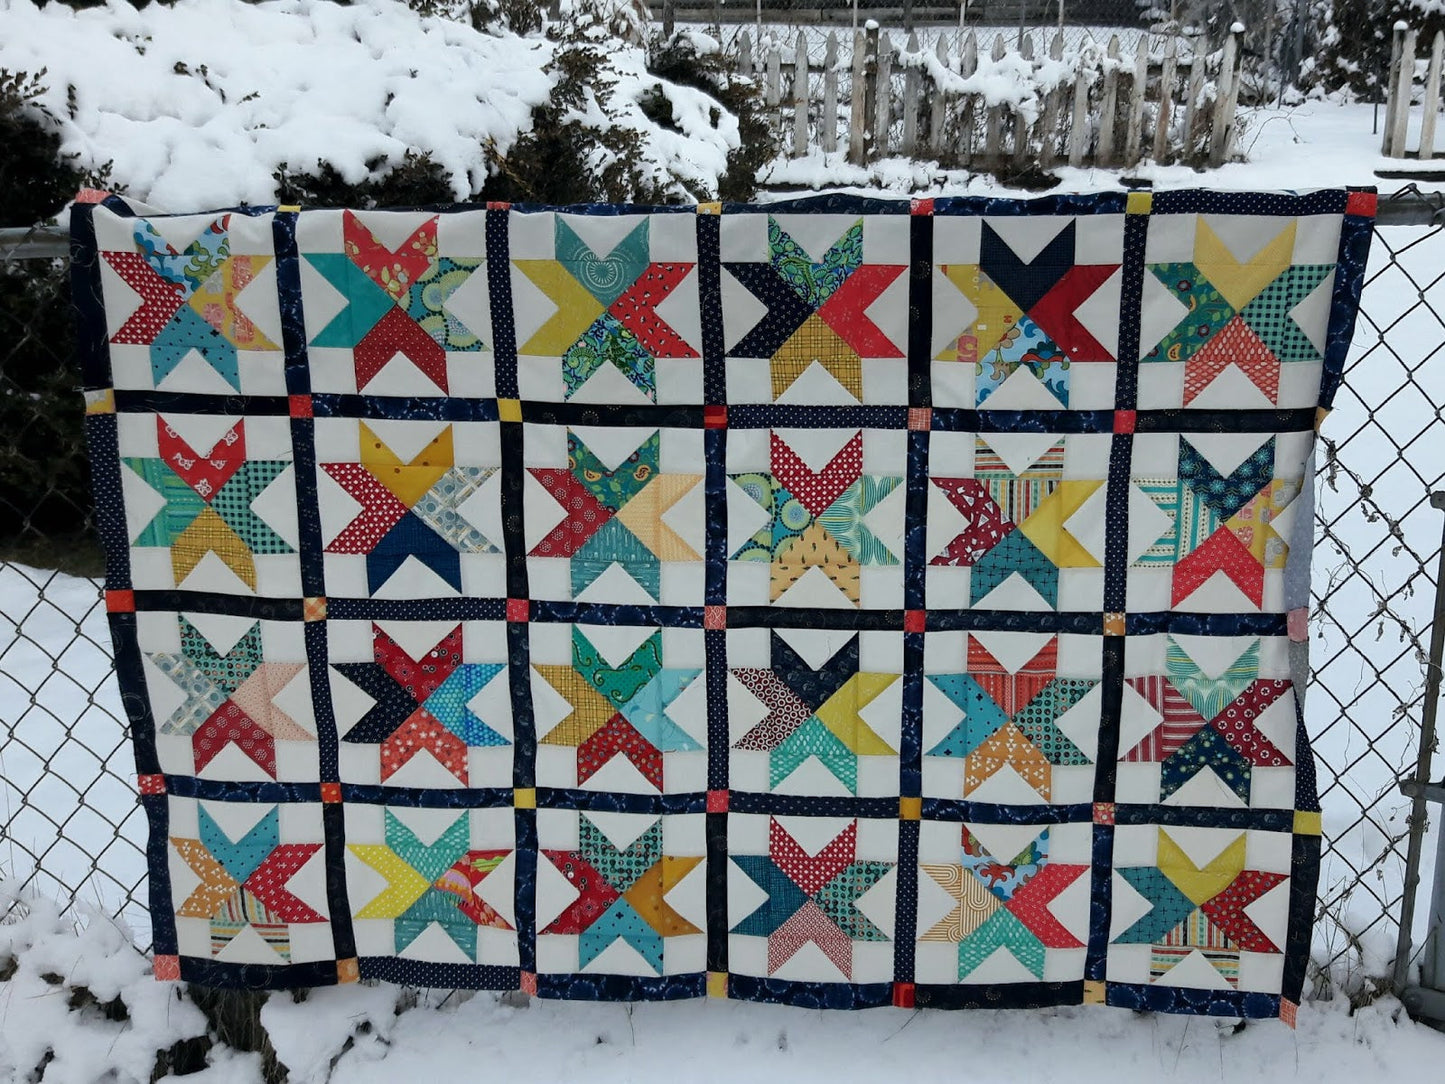 Braveheart Picnic Quilt & Matching Table Runner - Quilt Pattern